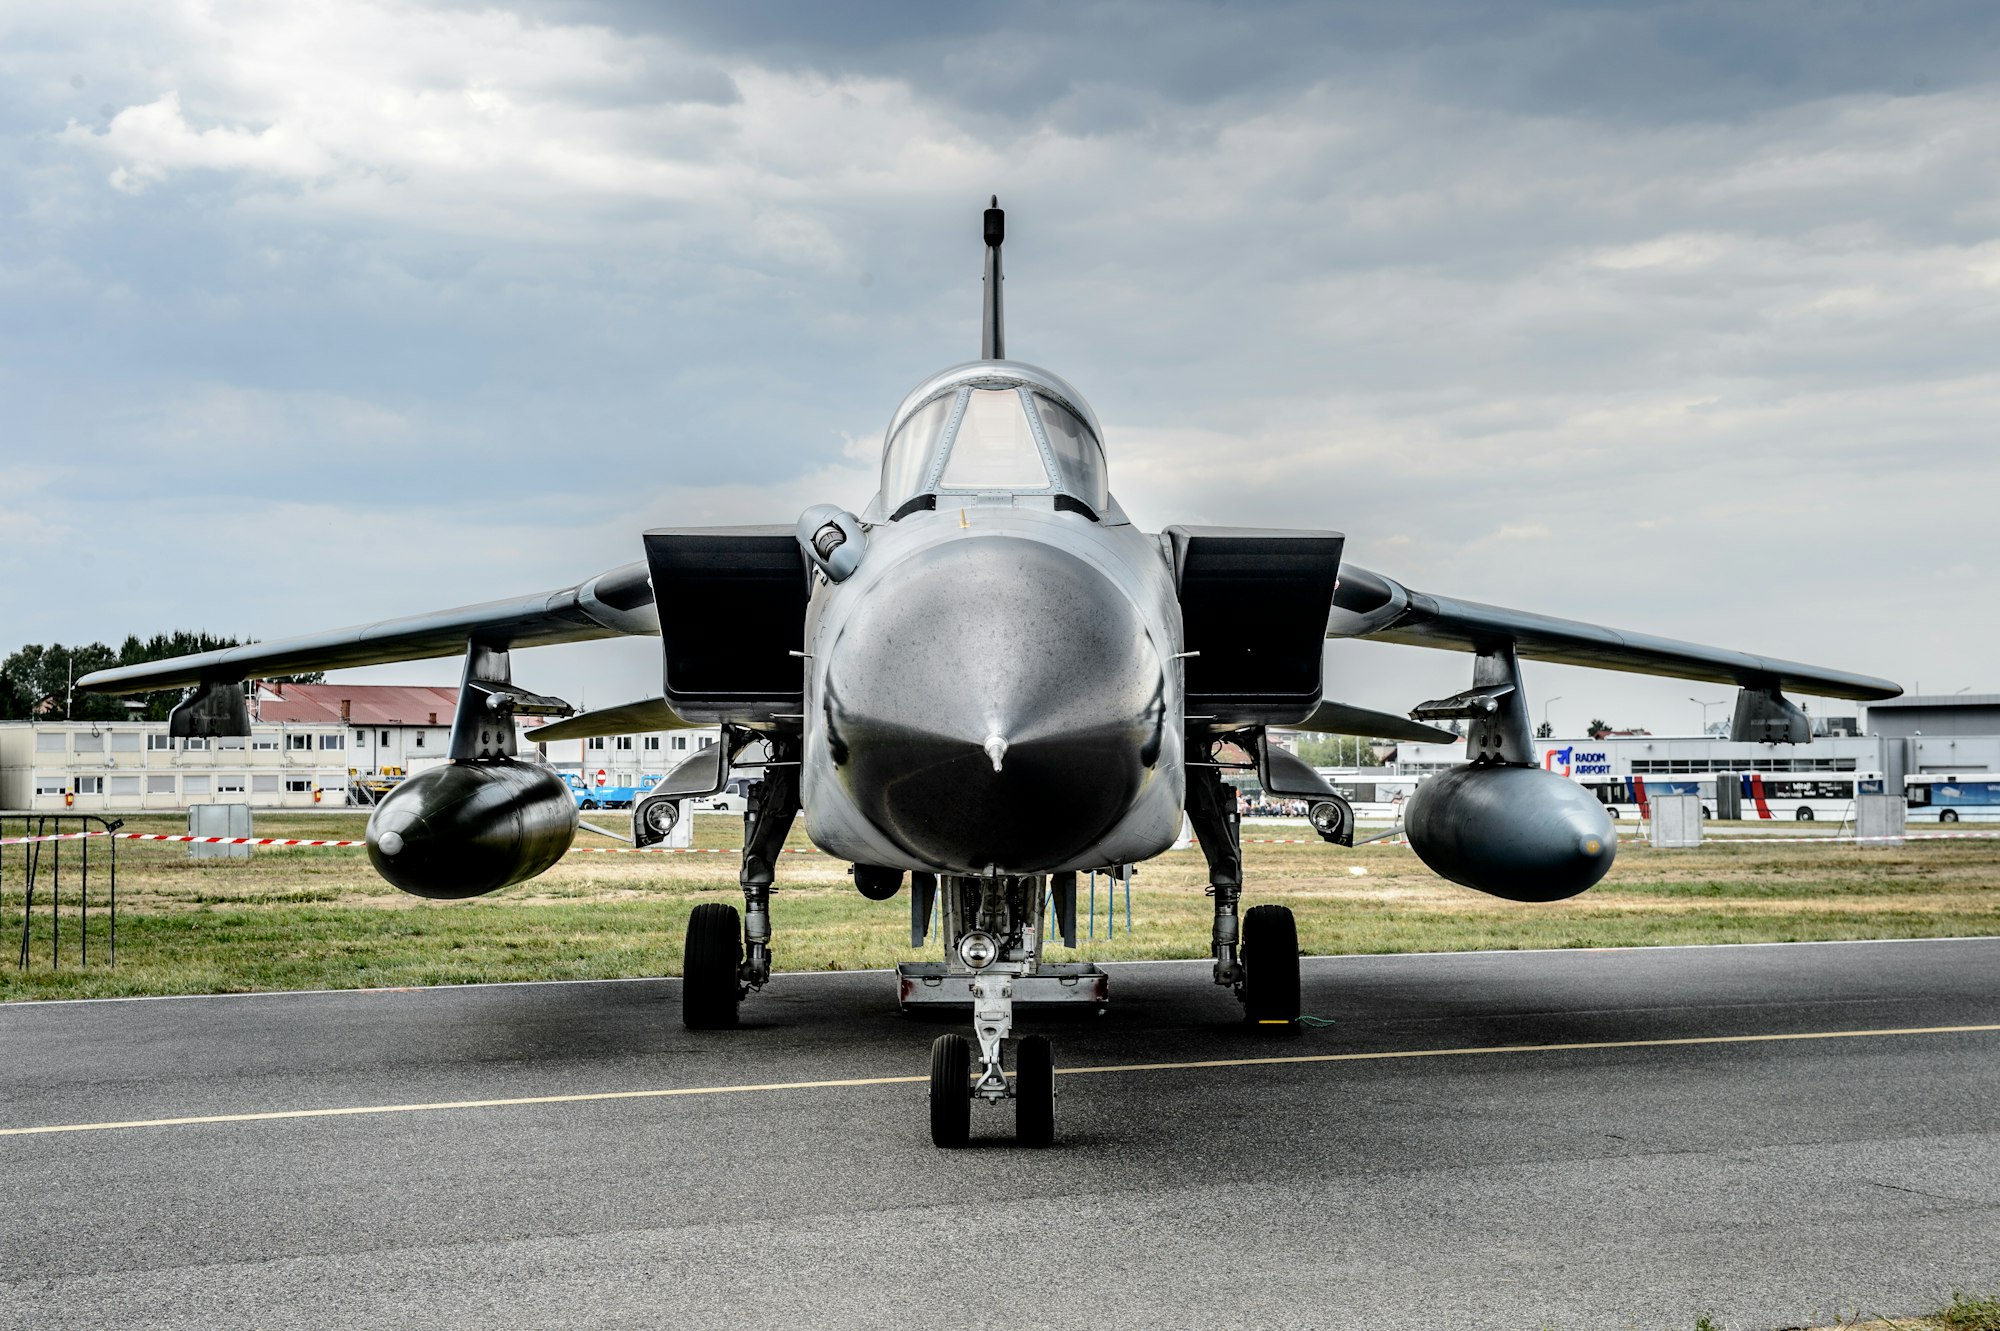 Israeli innovation adapts fighter jet tech to prevent car accidents